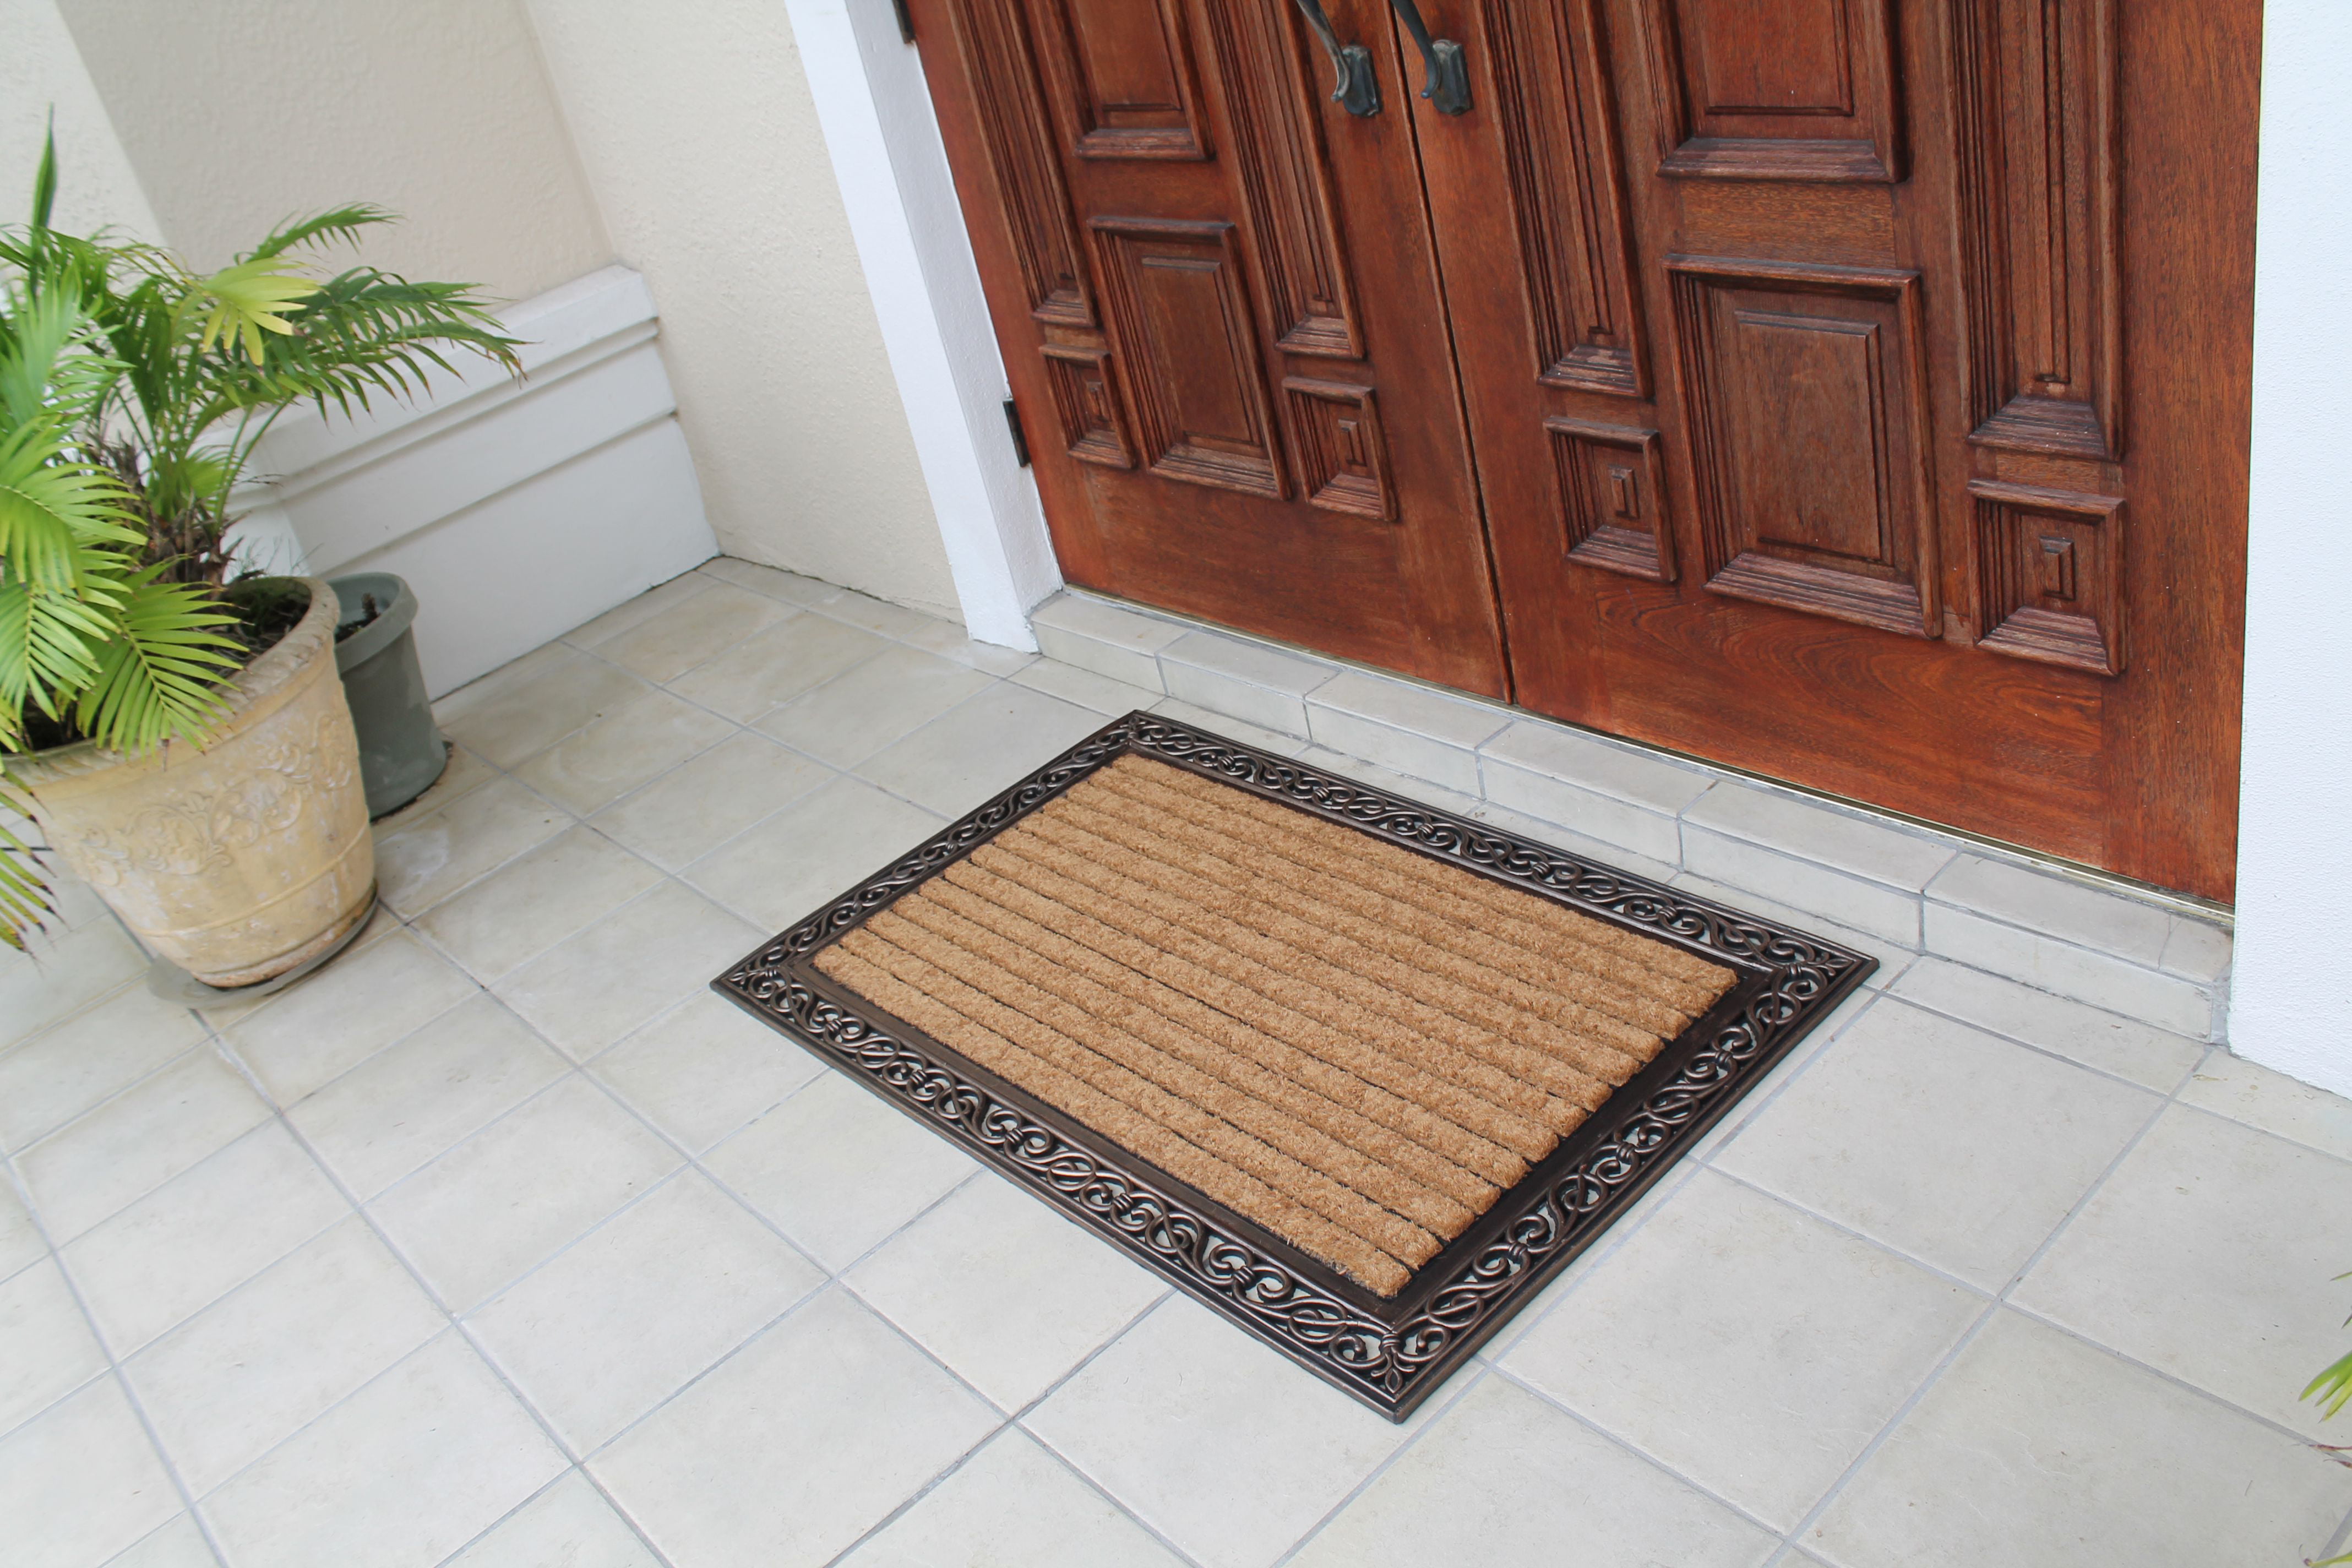 A1 Home Collections A1HC Bronze 23 in x 38 in Rubber and Coir Door Mat  Floral Border Dirt Trapper Heavy Weight Large Doormat A1HC029_Plain - The  Home Depot